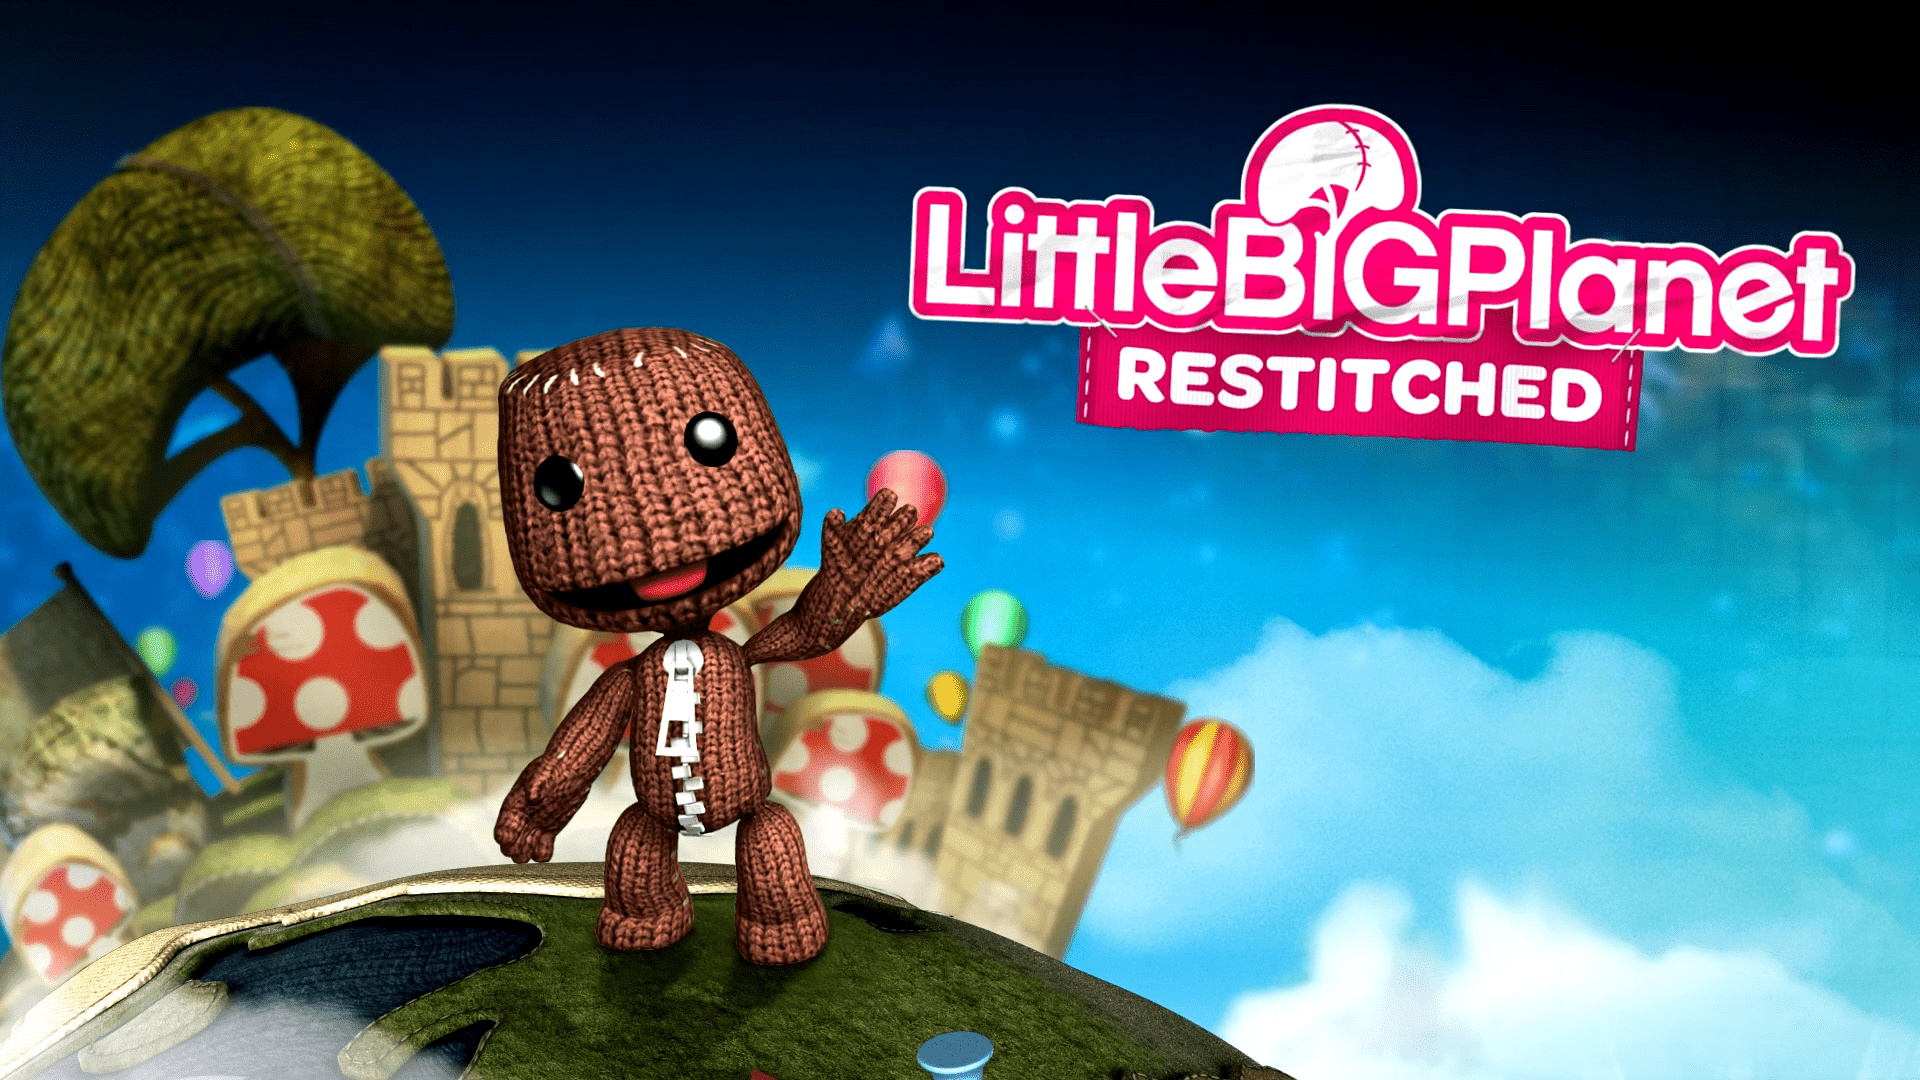 LittleBigPlanet, Restitched project, Sony Europe's cease and desist, Happy Gamer, 1920x1080 Full HD Desktop